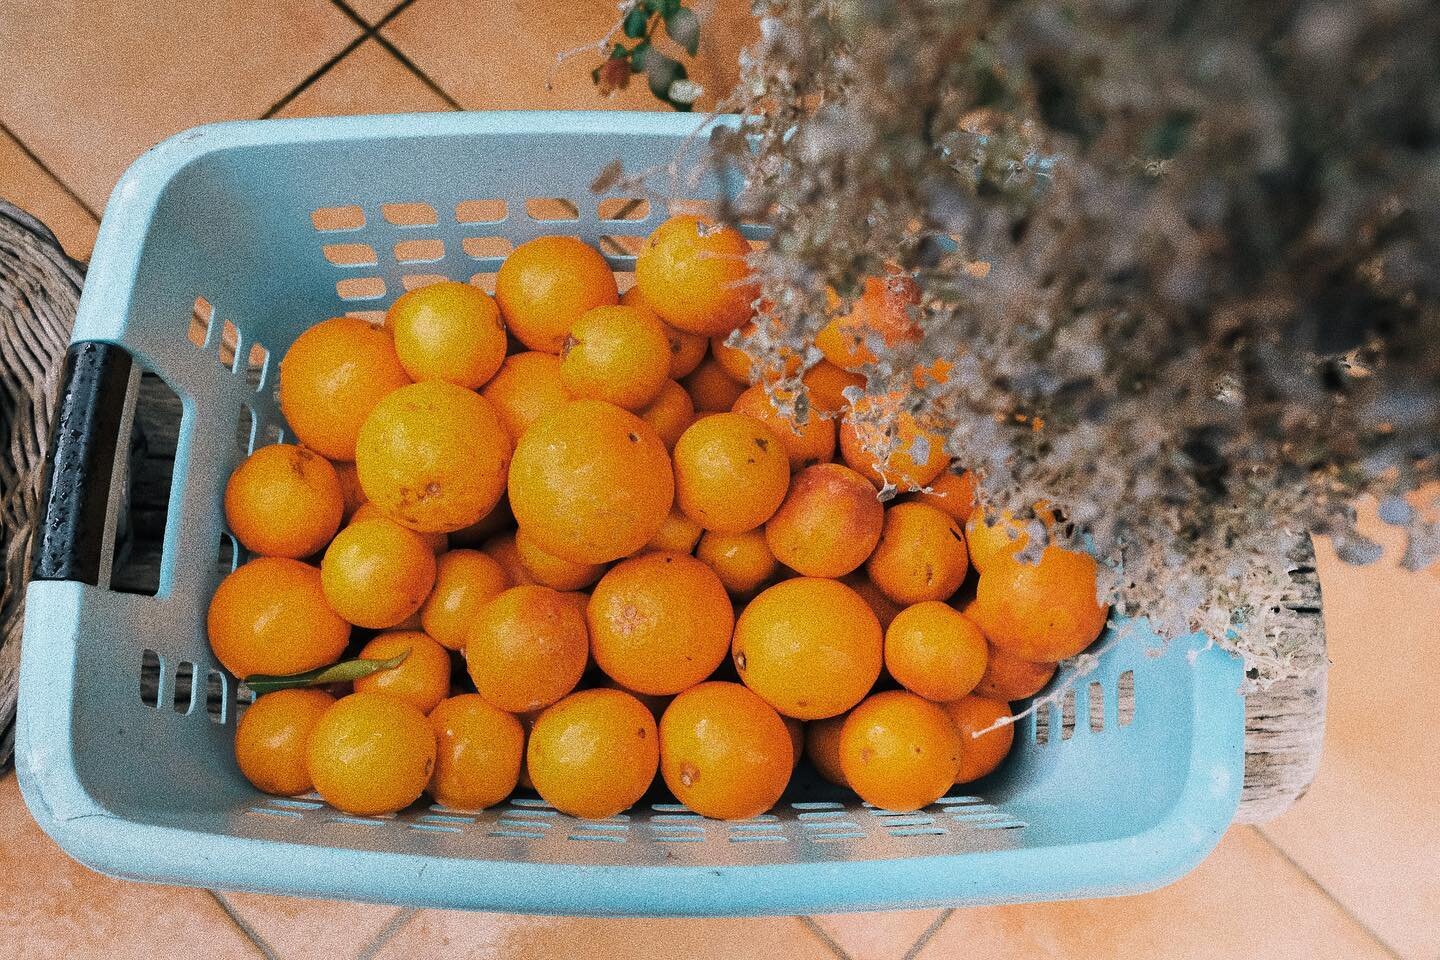 #shooting some #oranges
.
.
.
#spain #productionlife #onlocation #bts #agencylife #travelphotography #whatisee